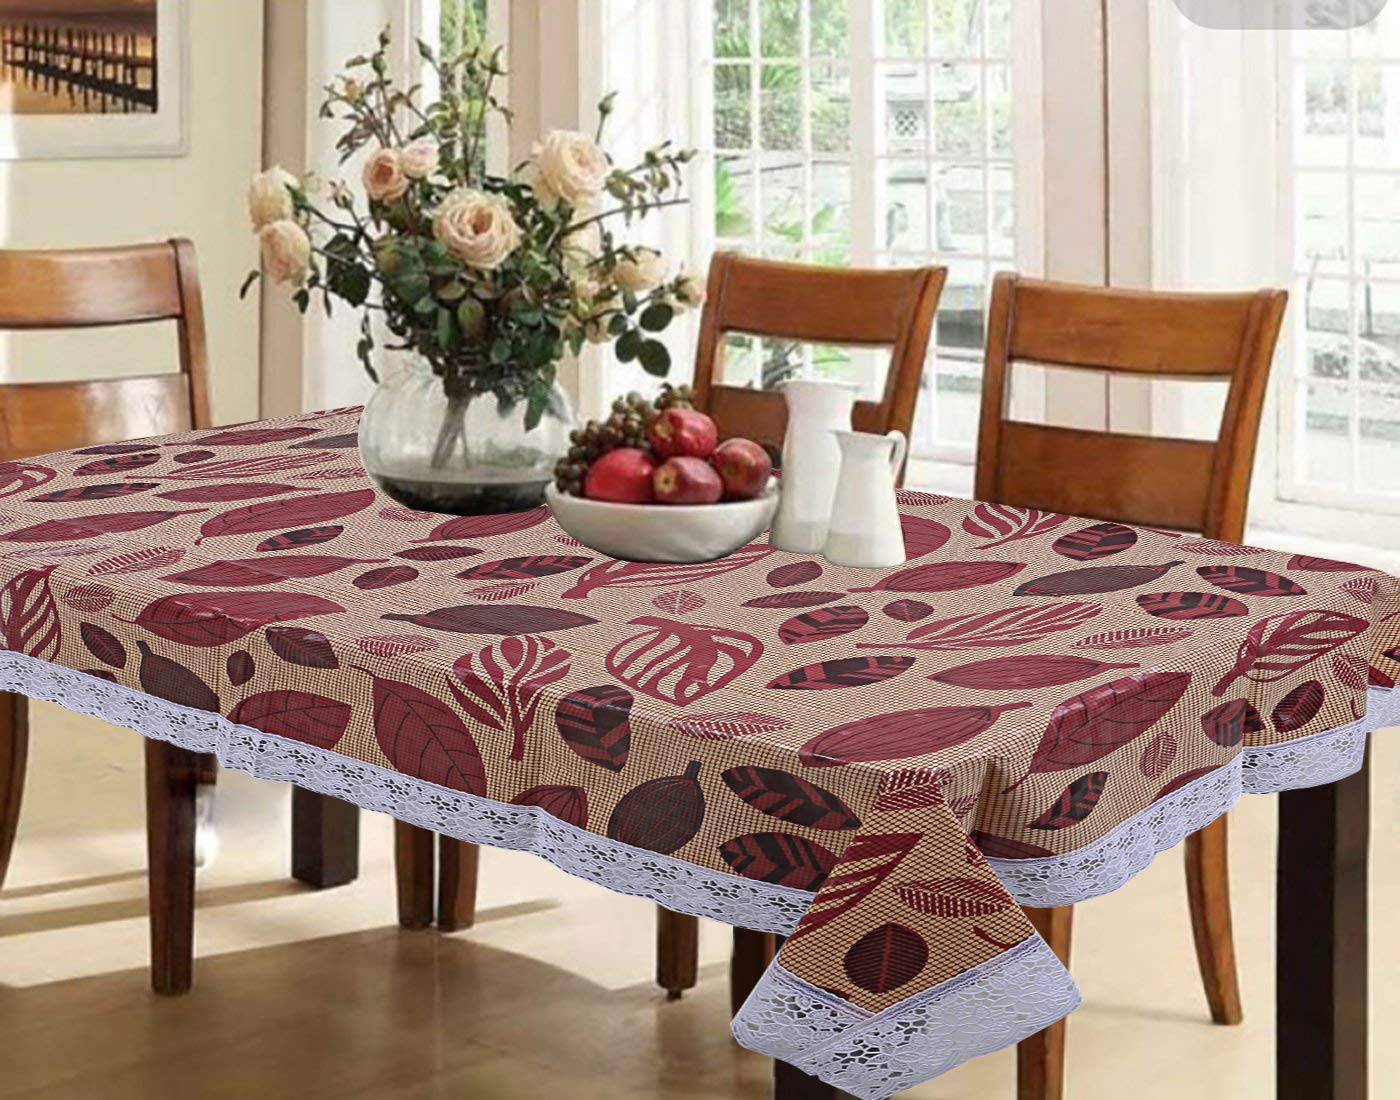 Kuber Industries Leaf Design 6 Seater Dining Table Cover (Brown, 54"x78") Polyvinyl Chloride (PVC),Rectangular,Pack of 1